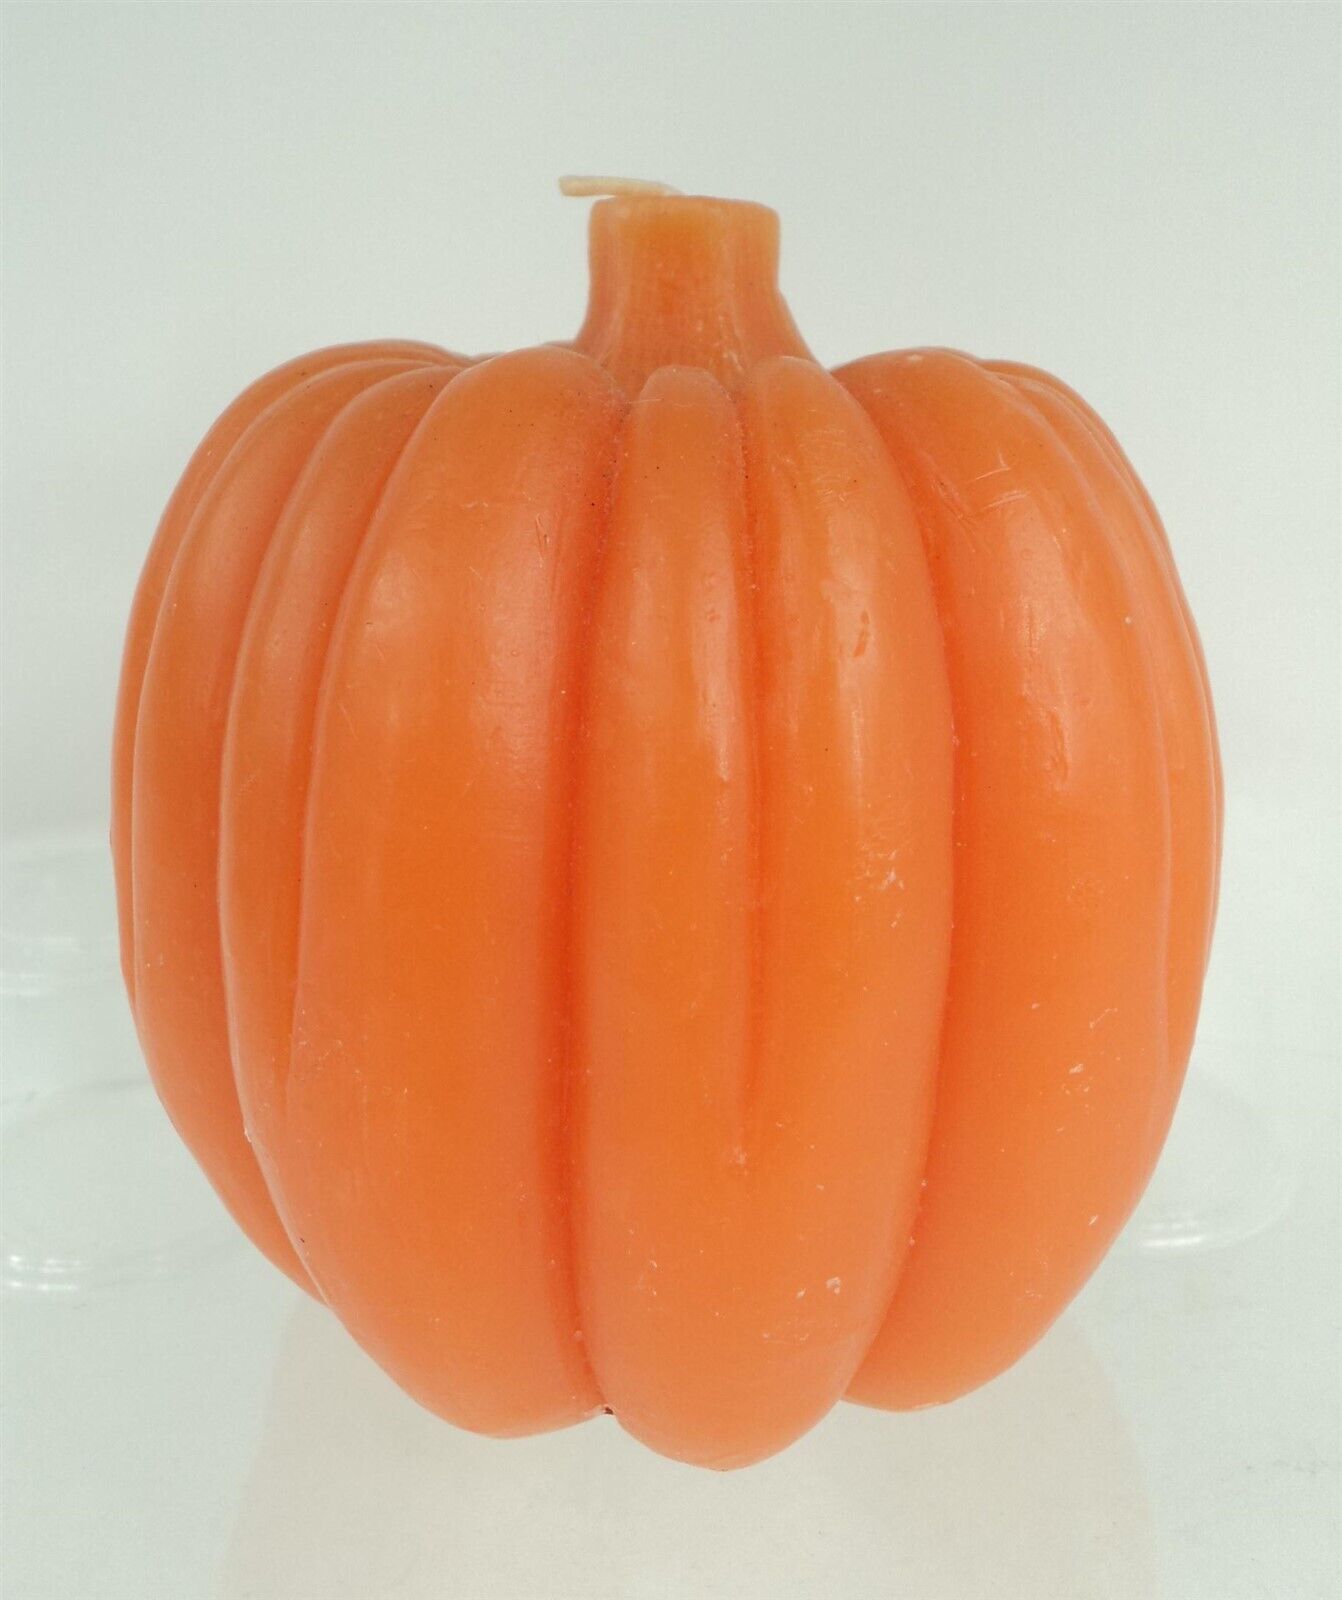 Primary image for Chesapeake Bay Large Pumpkin-Shape Candle - 31 oz - 5 x 5 inches - New!